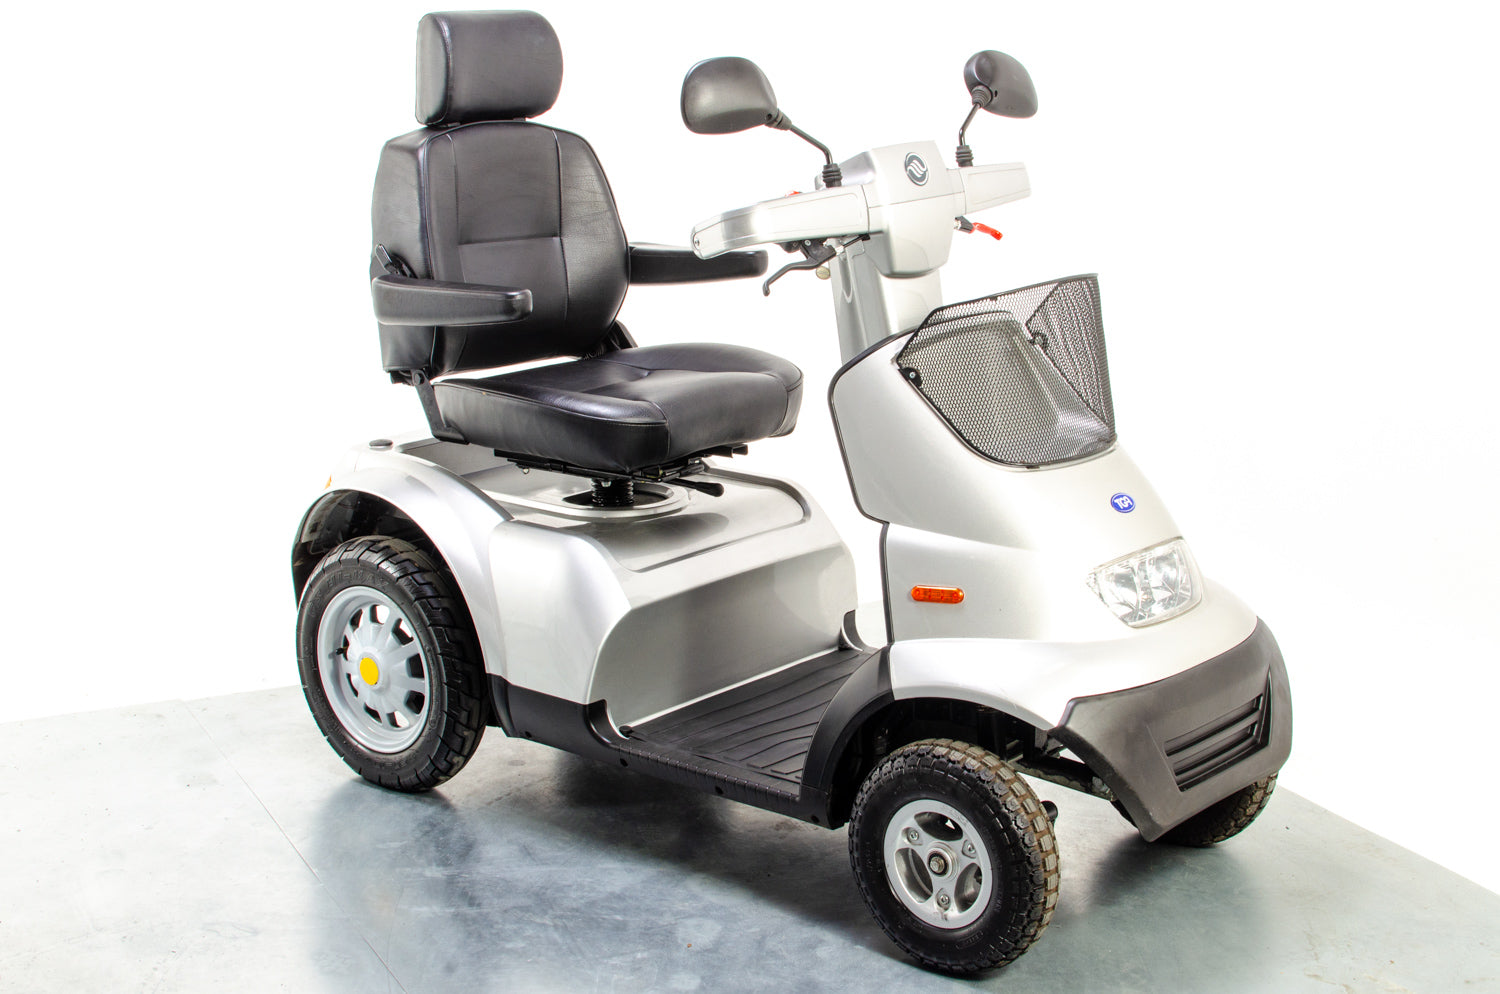 TGA Breeze S4 Used Mobility Scooter 8mph Large All-Terrain Road Legal Off-Road Silver